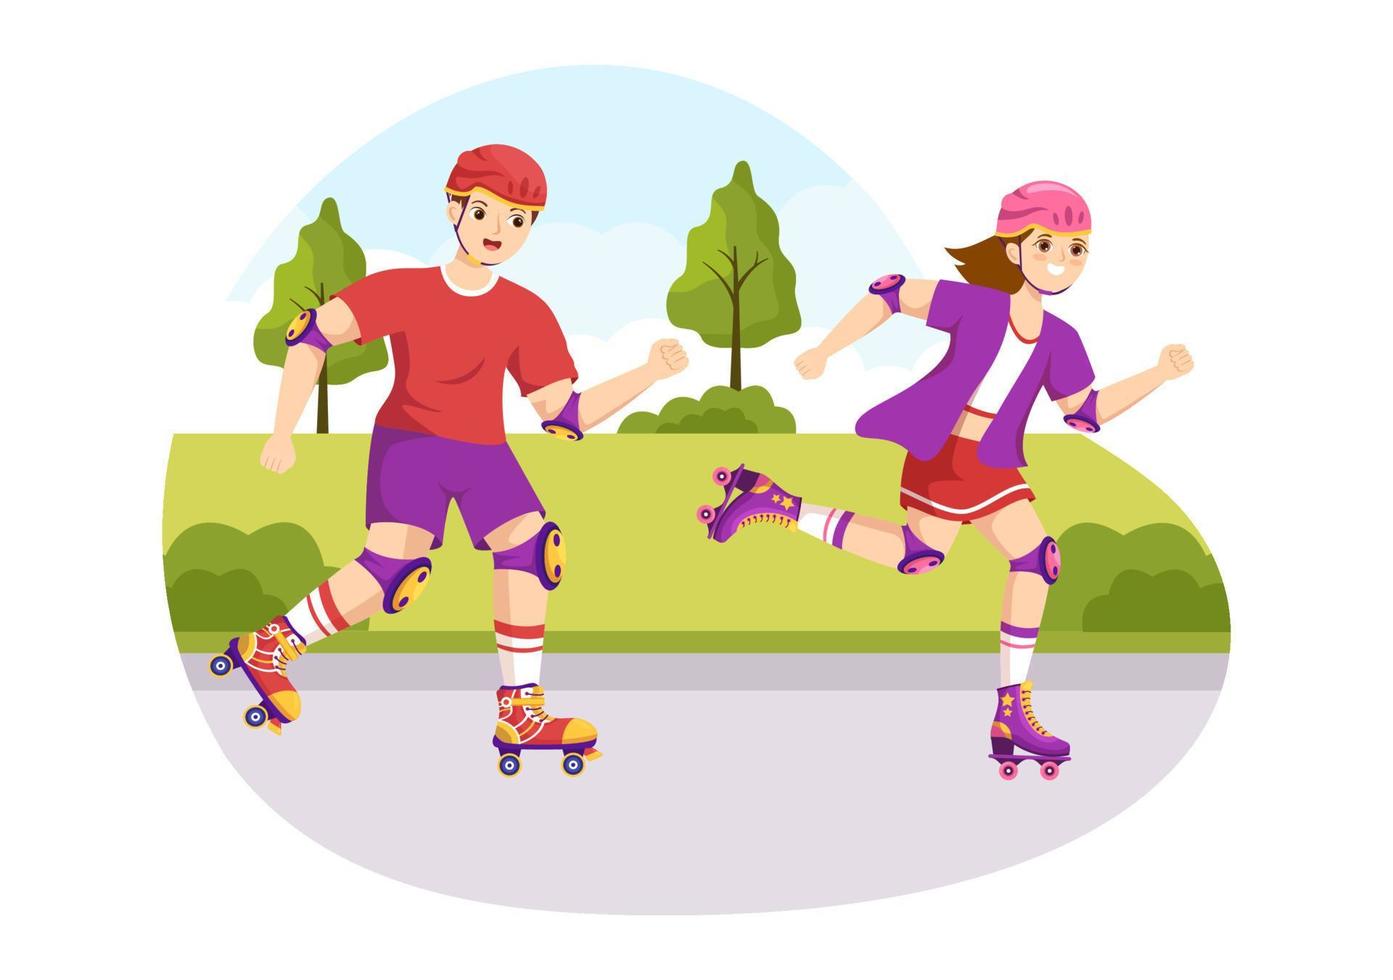 People Riding Roller Skates in City Park for Outdoor Activity, Sports Recreation or Weekend Recreation in Flat Cartoon Hand Drawn Template Illustration vector